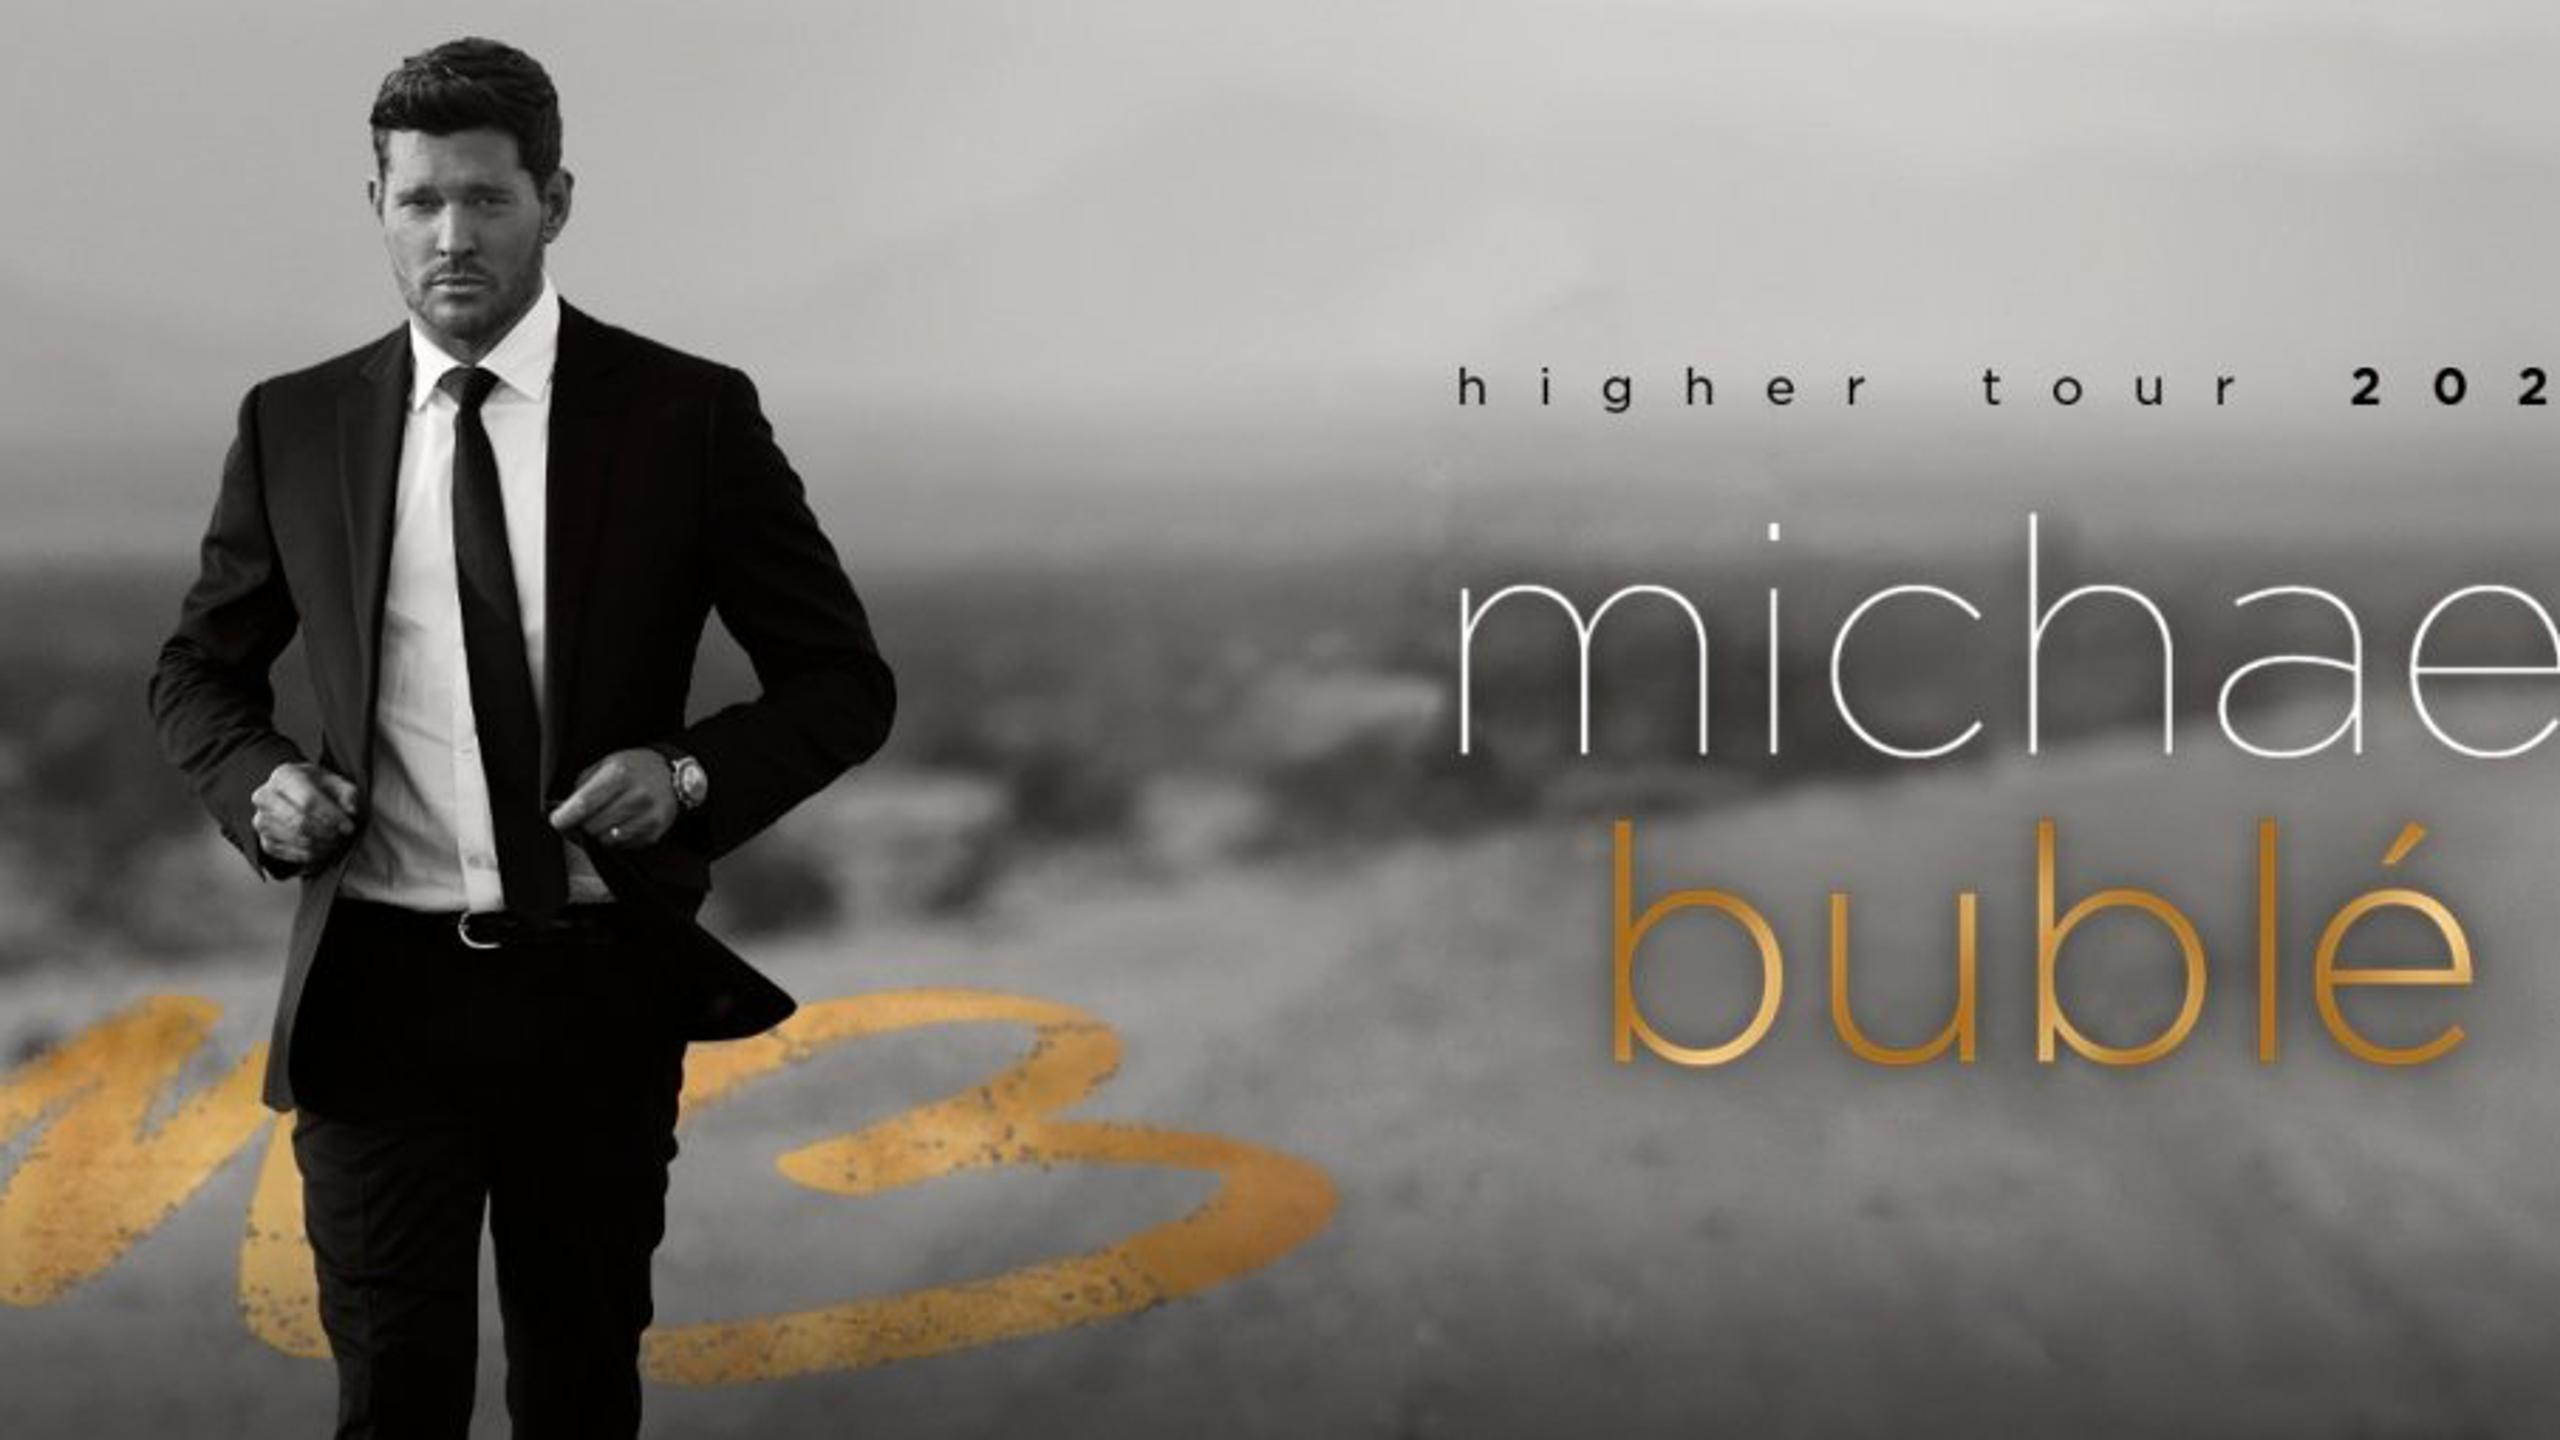 Michael Bublé concert tickets for Manchester AO Arena, Manchester